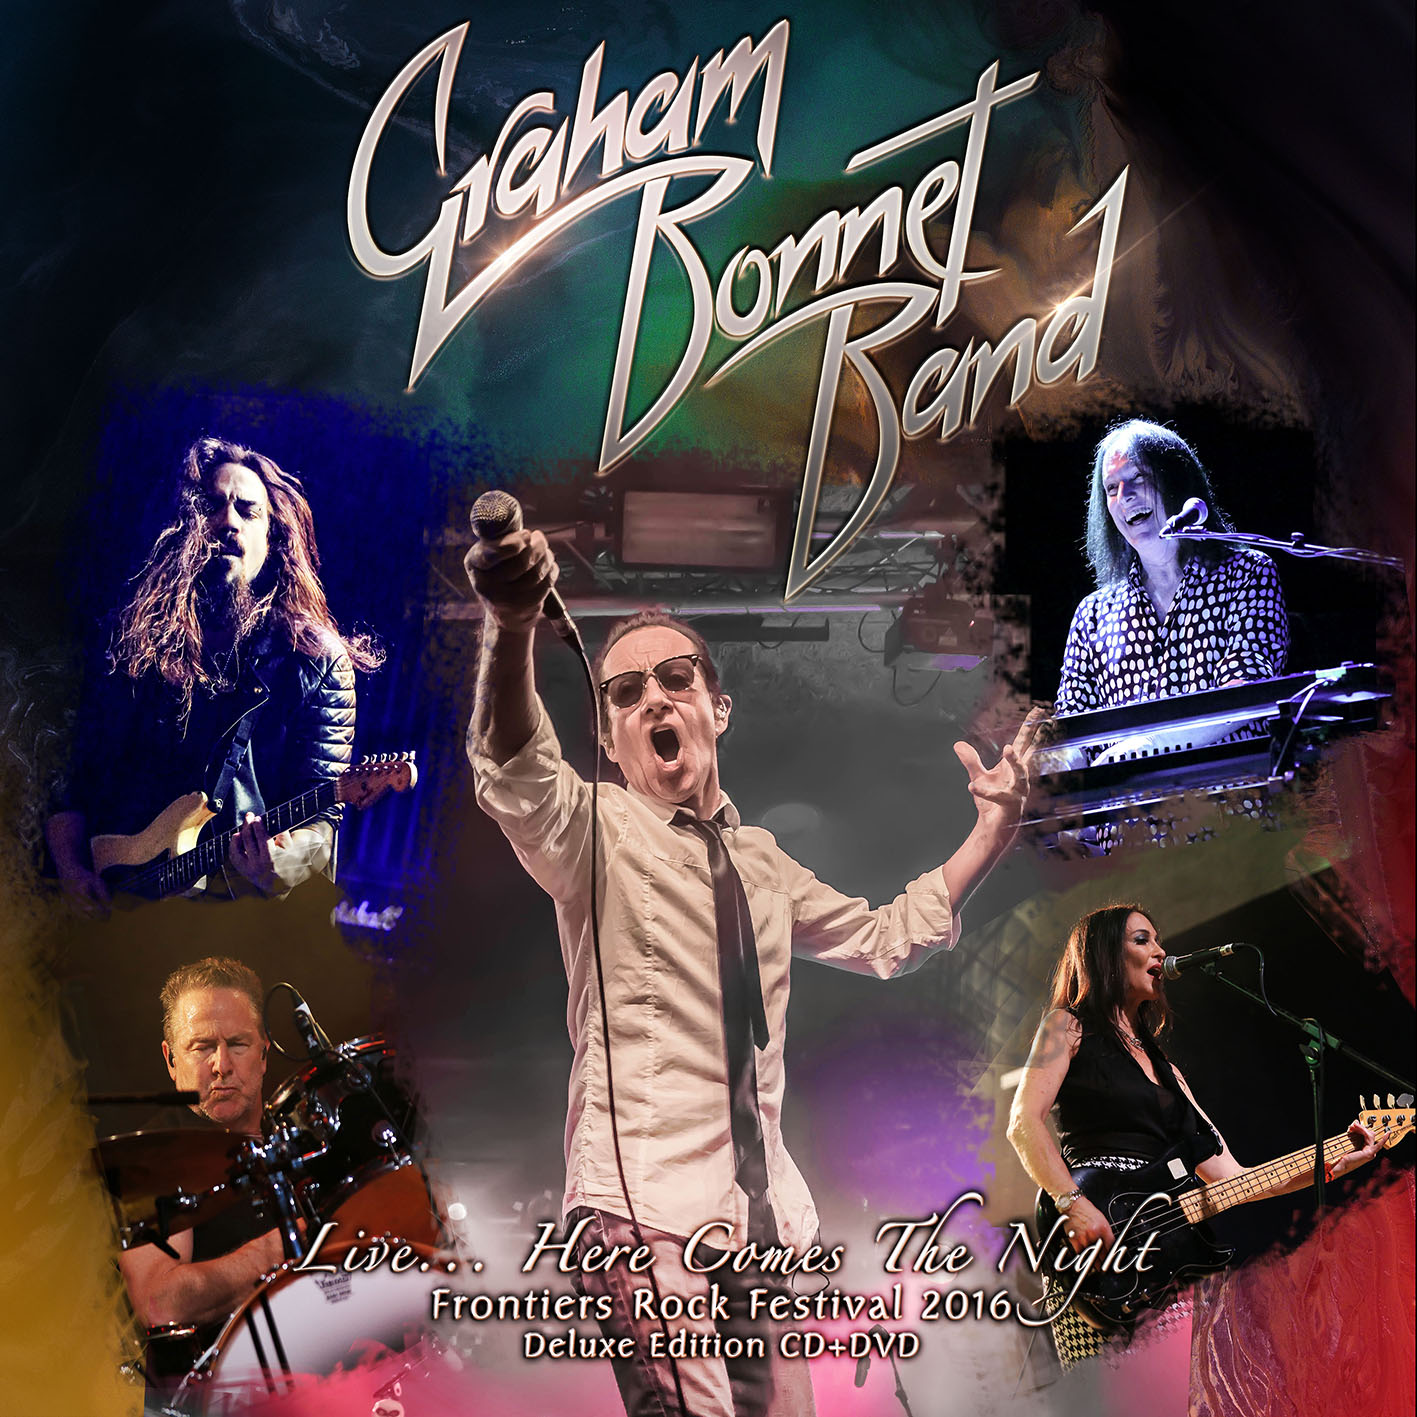 Graham Bonnet Band - Live... Here Comes The Night - CD+DVD